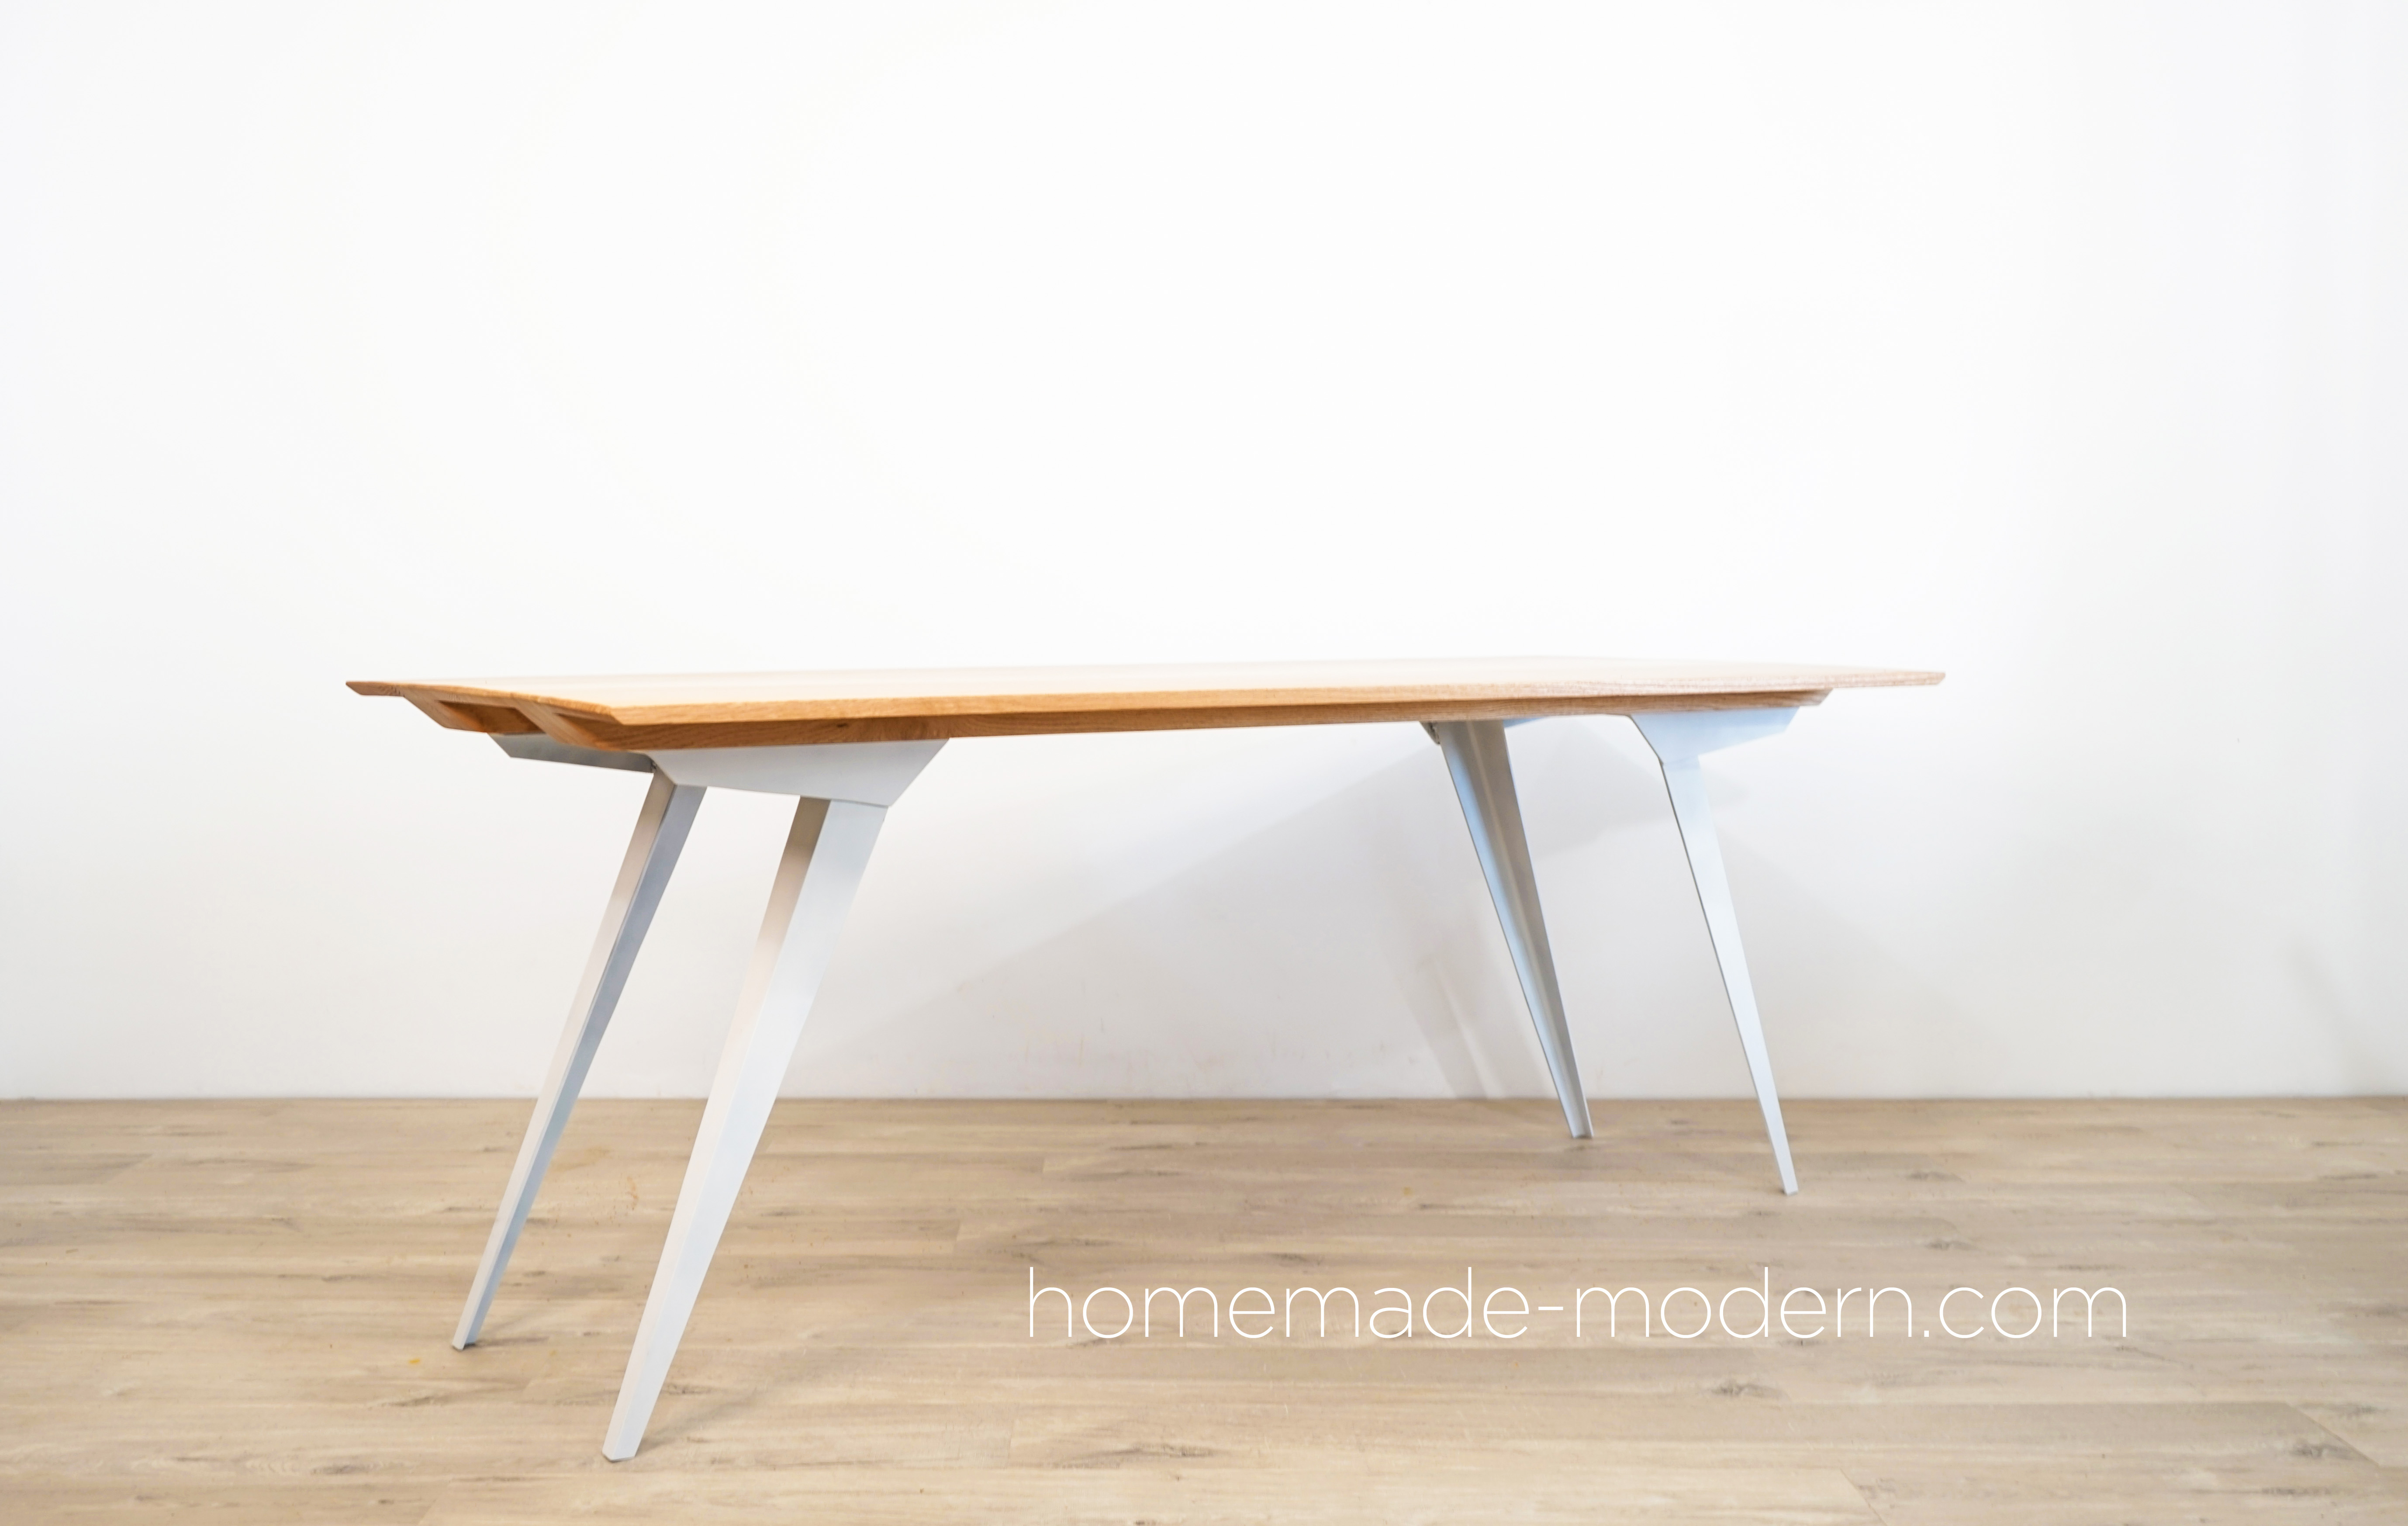 This DIY modern dining table features custom steel table legs that made out of 3”x3”x3/16” steel angles and an oak table top made out of ¾” thick oak from Home Depot. For more information go to HomeMade-Modern.com